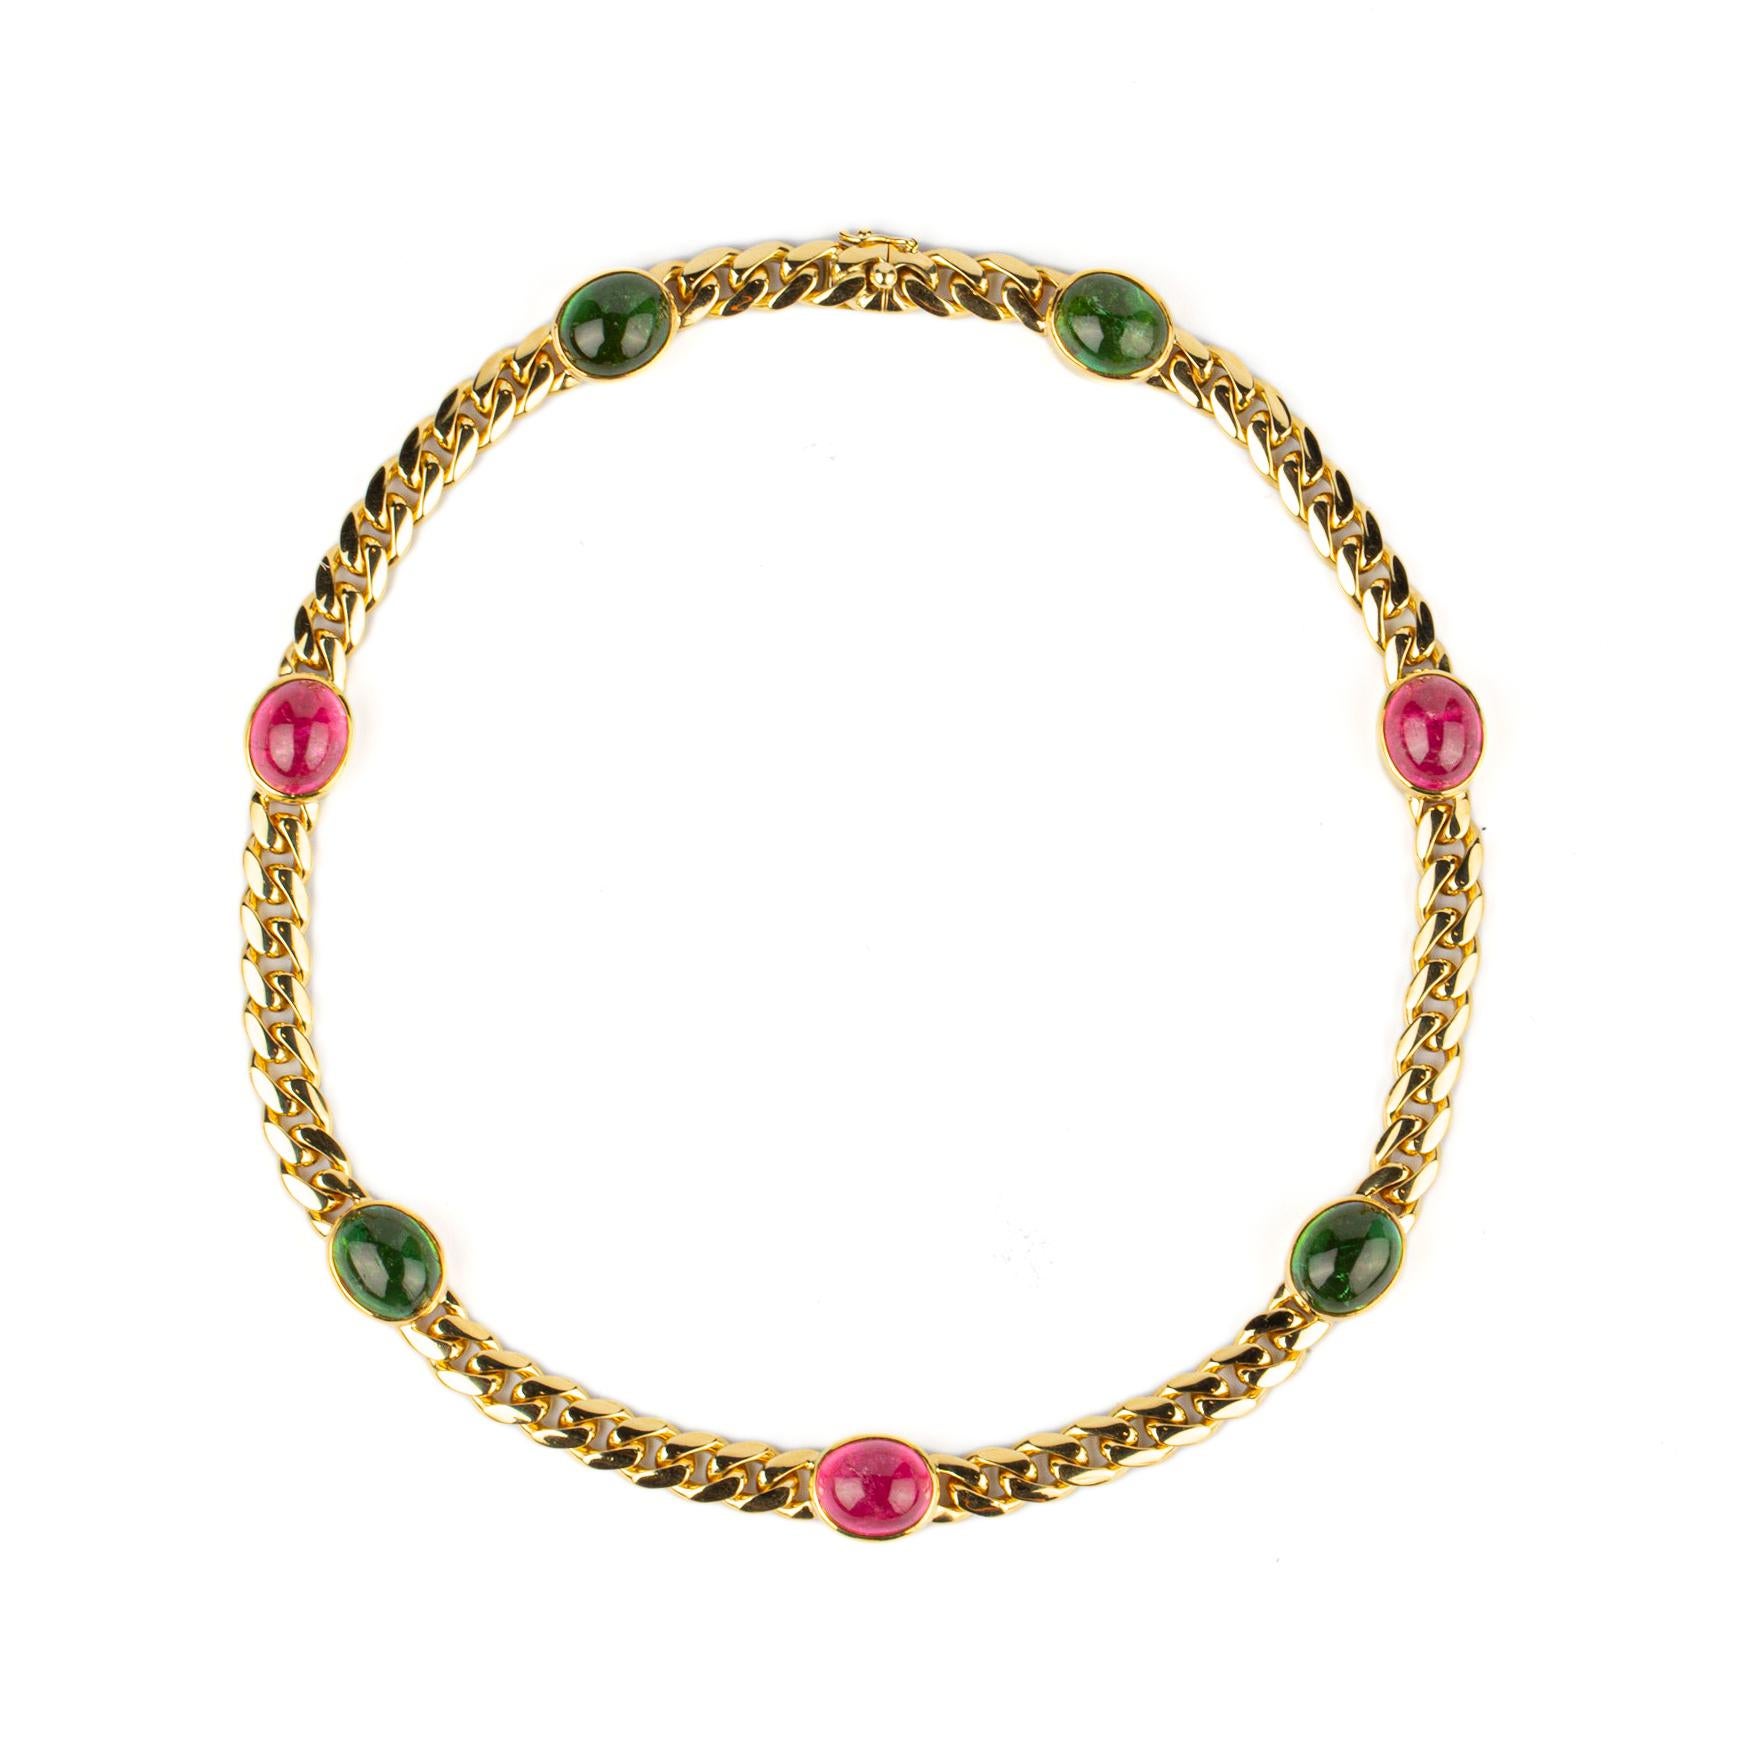 Bulgari 18k Yellow Gold & Green and Pink Tourmaline Gemstone Chain Necklace. Made in Italy, circa 1980.  